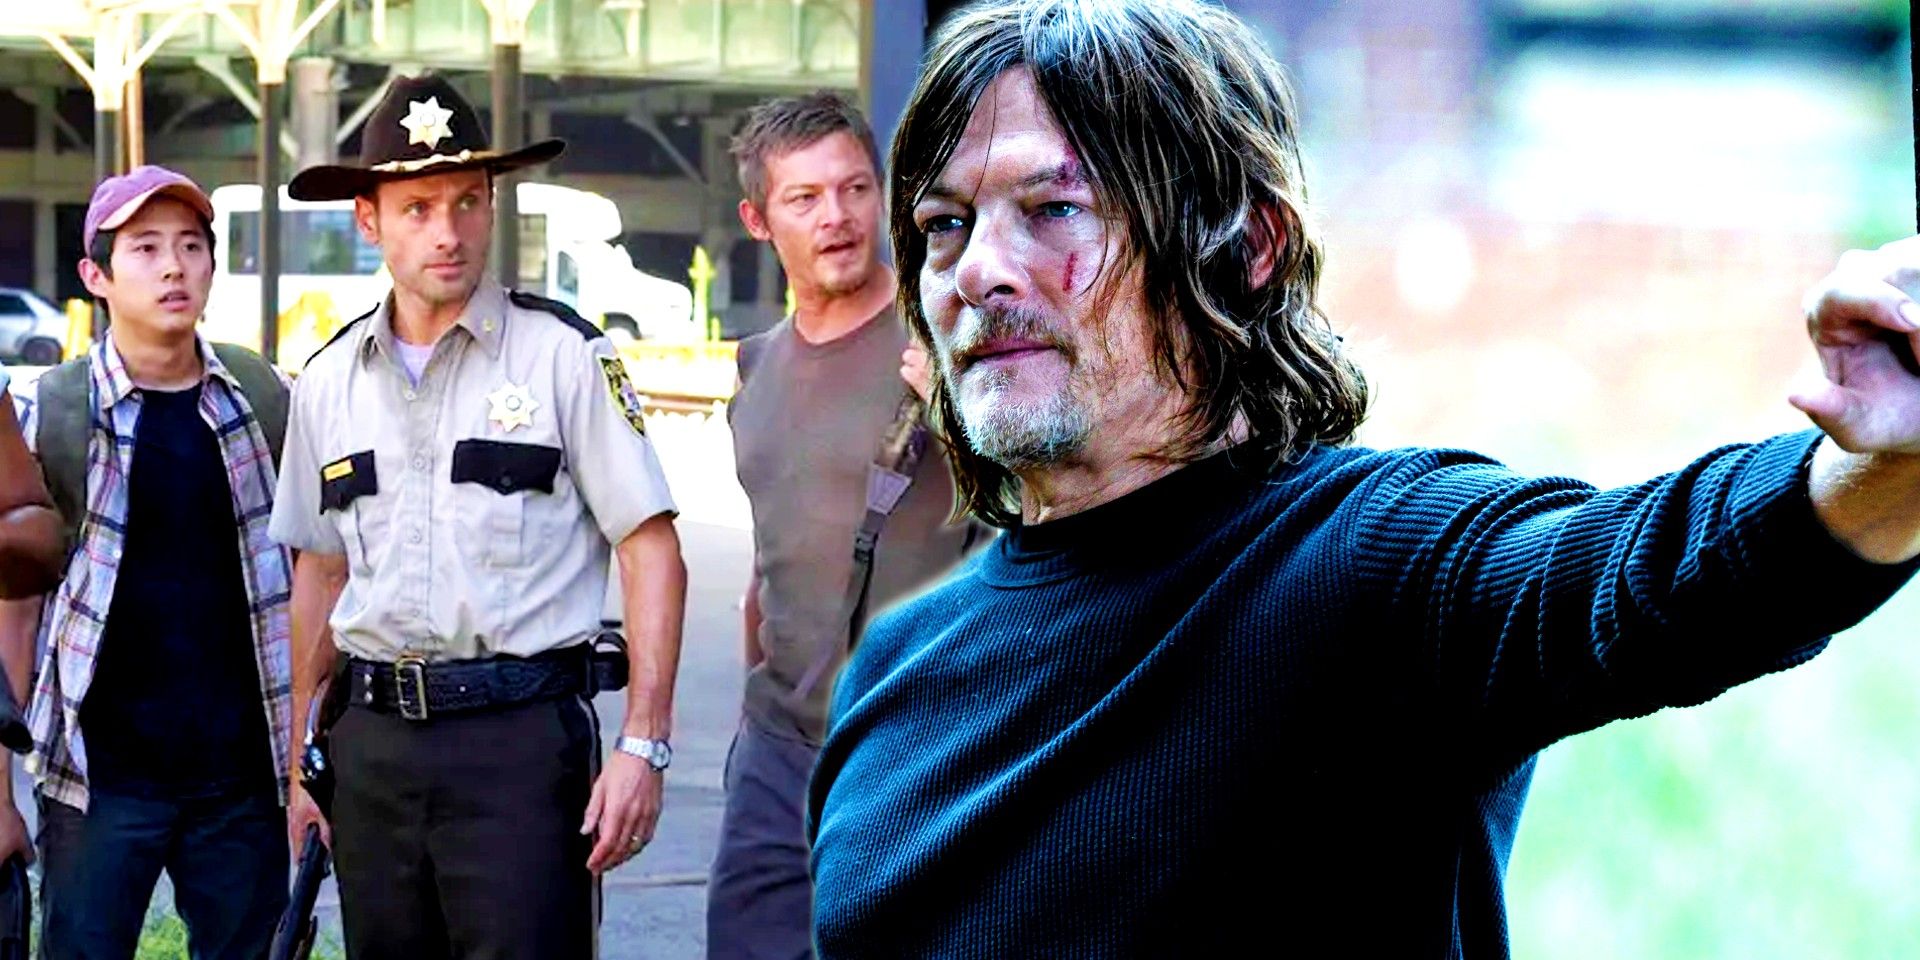 Custom image of Daryl Dixon in France and Daryl with Rick and Glen in The Walking Dead season 1